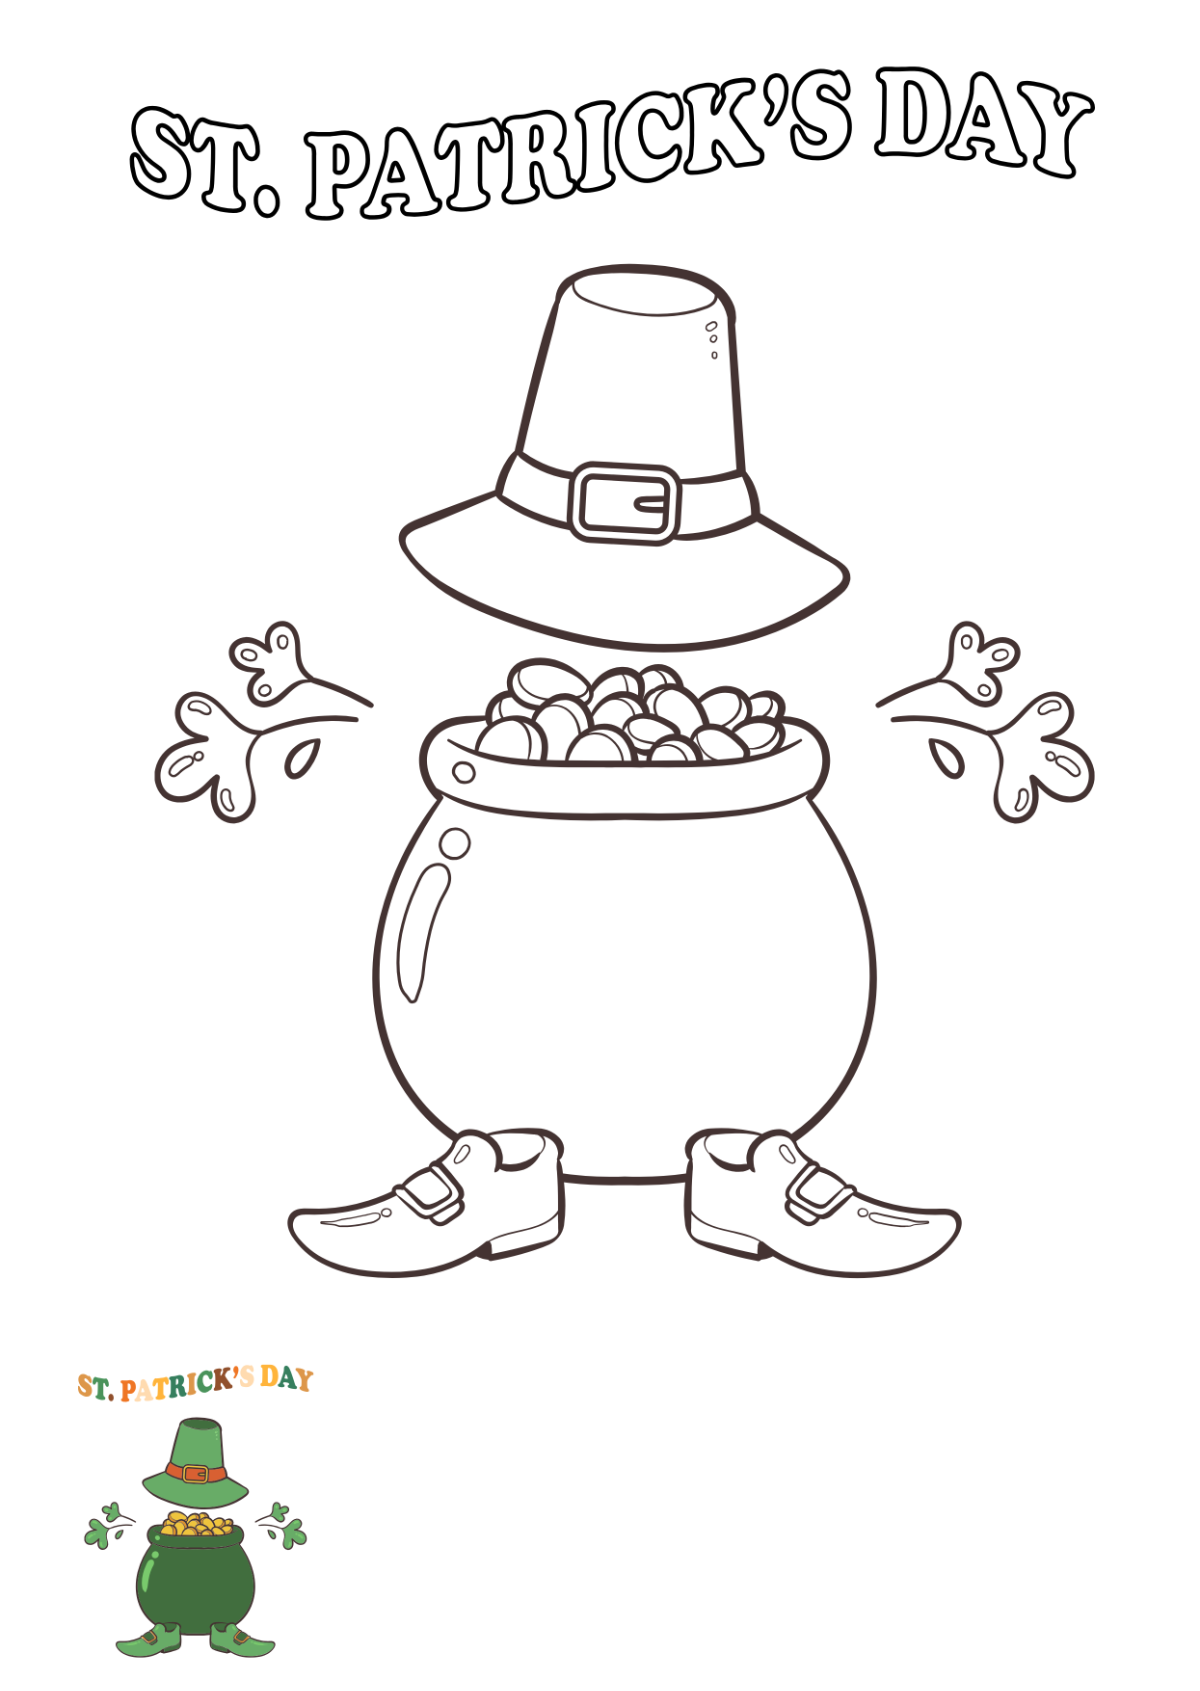 Free St. Patrick’s Day Coloring Page for Kids Template